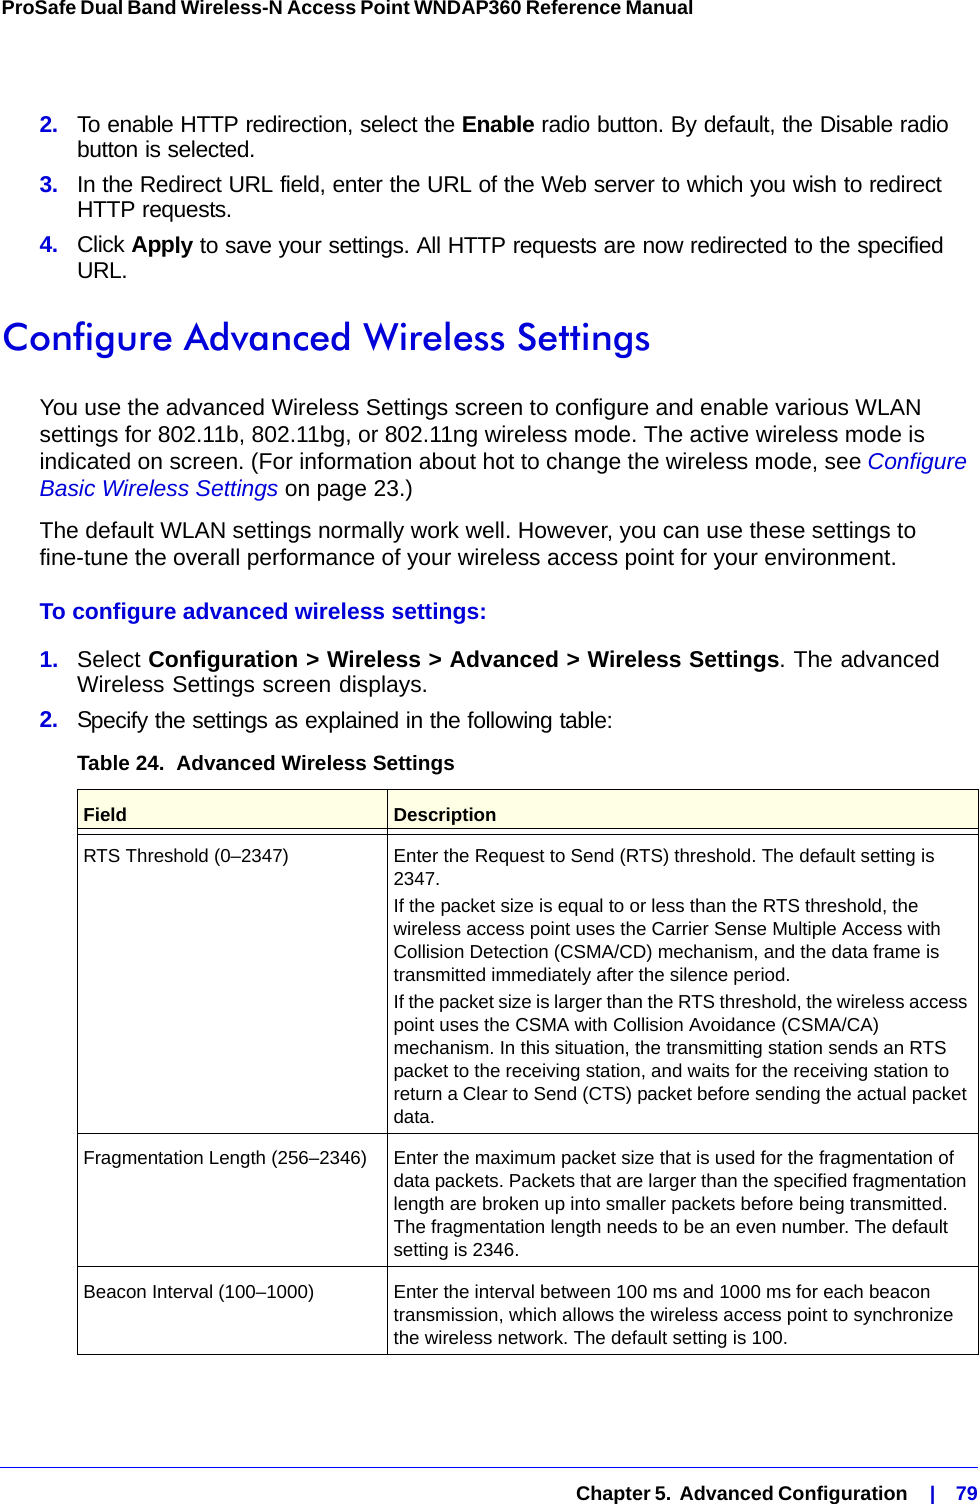   Chapter 5.  Advanced Configuration    |    79ProSafe Dual Band Wireless-N Access Point WNDAP360 Reference Manual 2.  To enable HTTP redirection, select the Enable radio button. By default, the Disable radio button is selected.3.  In the Redirect URL field, enter the URL of the Web server to which you wish to redirect HTTP requests.4.  Click Apply to save your settings. All HTTP requests are now redirected to the specified URL.Configure Advanced Wireless SettingsYou use the advanced Wireless Settings screen to configure and enable various WLAN settings for 802.11b, 802.11bg, or 802.11ng wireless mode. The active wireless mode is indicated on screen. (For information about hot to change the wireless mode, see Configure Basic Wireless Settings on page 23.) The default WLAN settings normally work well. However, you can use these settings to fine-tune the overall performance of your wireless access point for your environment.To configure advanced wireless settings:1.  Select Configuration &gt; Wireless &gt; Advanced &gt; Wireless Settings. The advanced Wireless Settings screen displays. 2.  Specify the settings as explained in the following table:Table 24.  Advanced Wireless Settings Field DescriptionRTS Threshold (0–2347) Enter the Request to Send (RTS) threshold. The default setting is 2347.If the packet size is equal to or less than the RTS threshold, the wireless access point uses the Carrier Sense Multiple Access with Collision Detection (CSMA/CD) mechanism, and the data frame is transmitted immediately after the silence period.If the packet size is larger than the RTS threshold, the wireless access point uses the CSMA with Collision Avoidance (CSMA/CA) mechanism. In this situation, the transmitting station sends an RTS packet to the receiving station, and waits for the receiving station to return a Clear to Send (CTS) packet before sending the actual packet data.Fragmentation Length (256–2346) Enter the maximum packet size that is used for the fragmentation of data packets. Packets that are larger than the specified fragmentation length are broken up into smaller packets before being transmitted. The fragmentation length needs to be an even number. The default setting is 2346.Beacon Interval (100–1000) Enter the interval between 100 ms and 1000 ms for each beacon transmission, which allows the wireless access point to synchronize the wireless network. The default setting is 100.